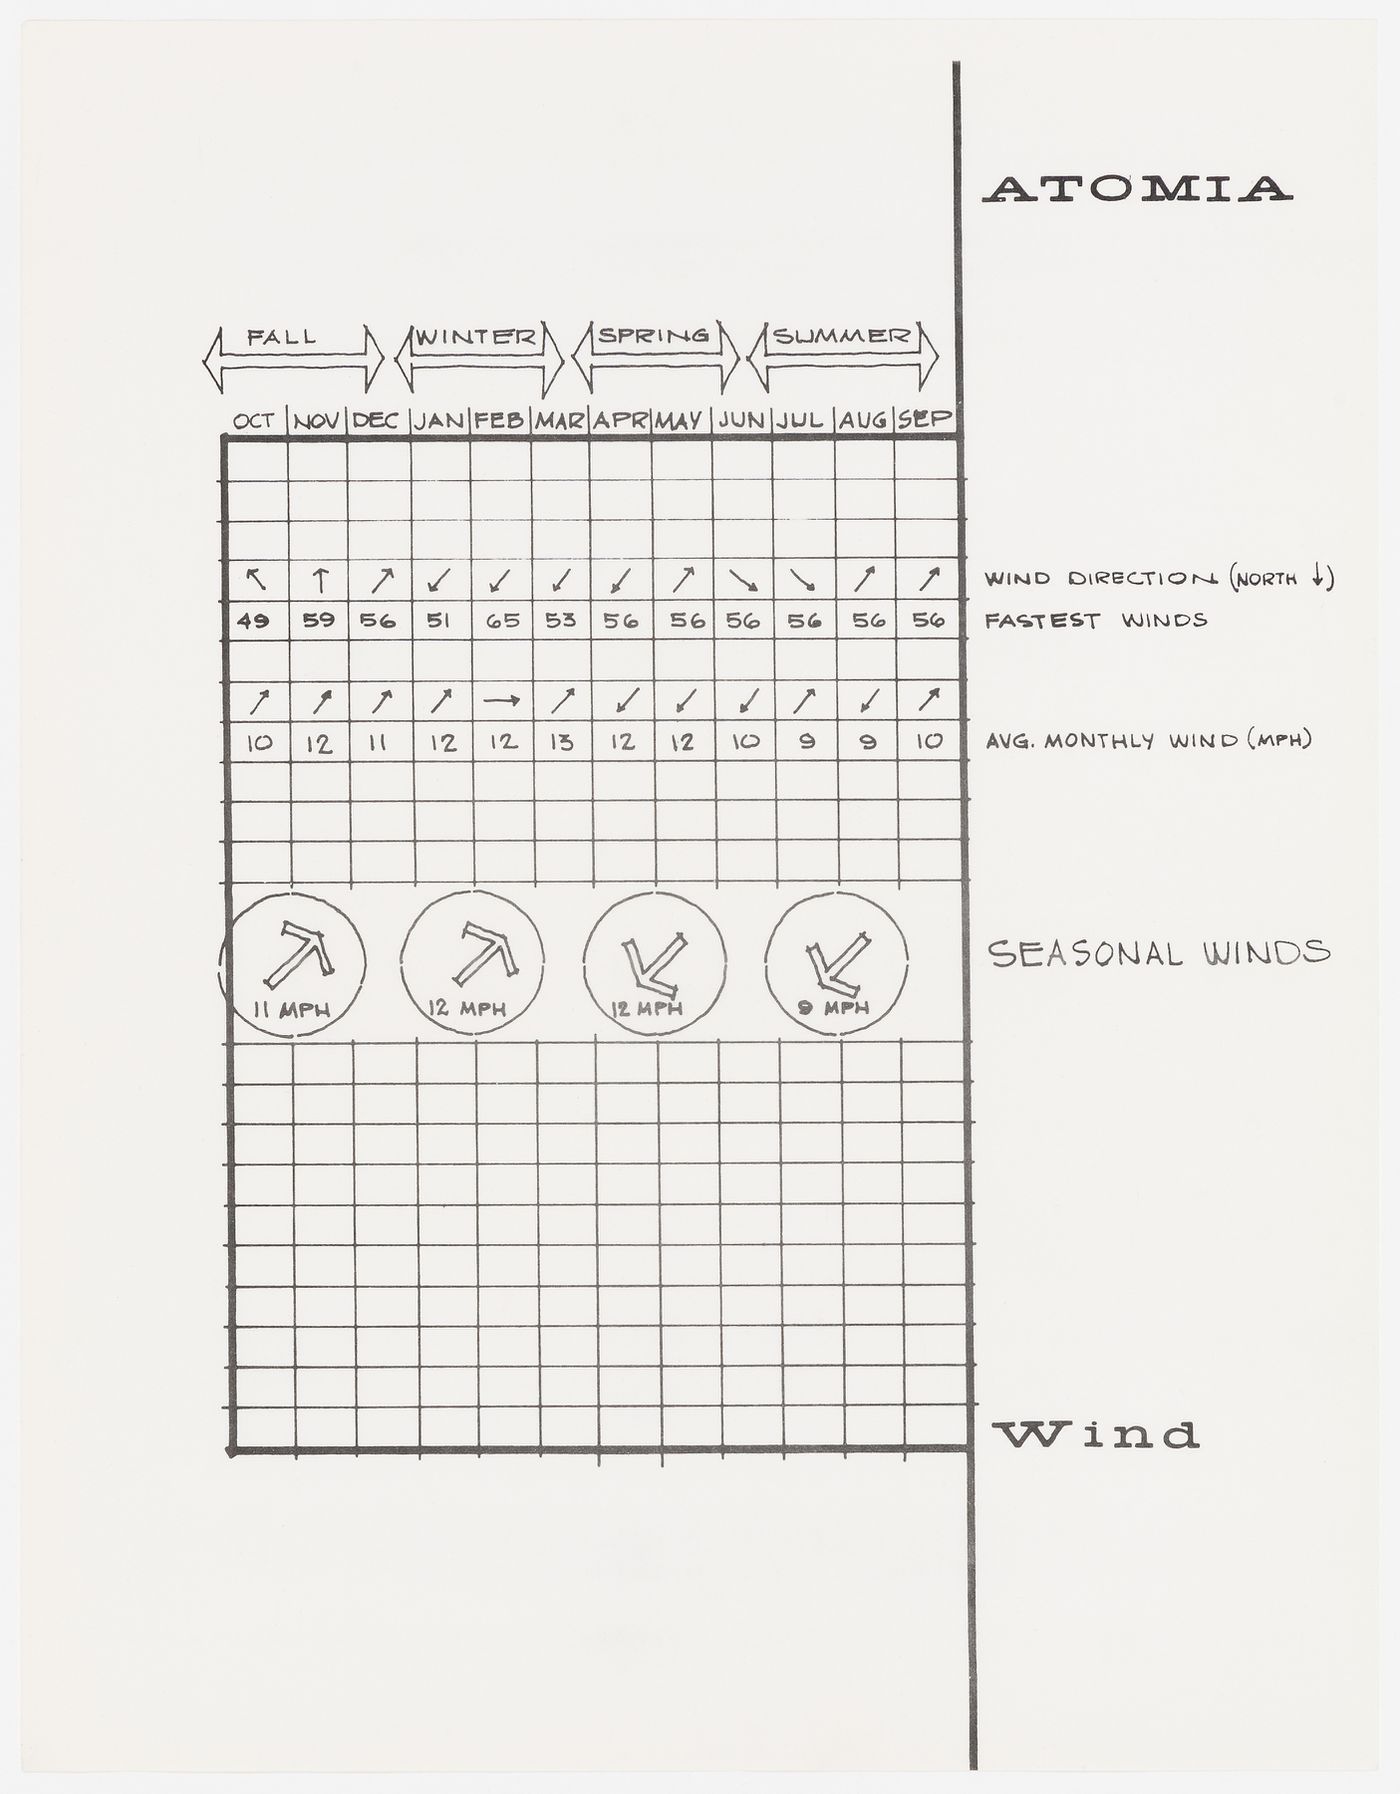 Atomia: chart illustrating wind conditions (document from the Atom project records)